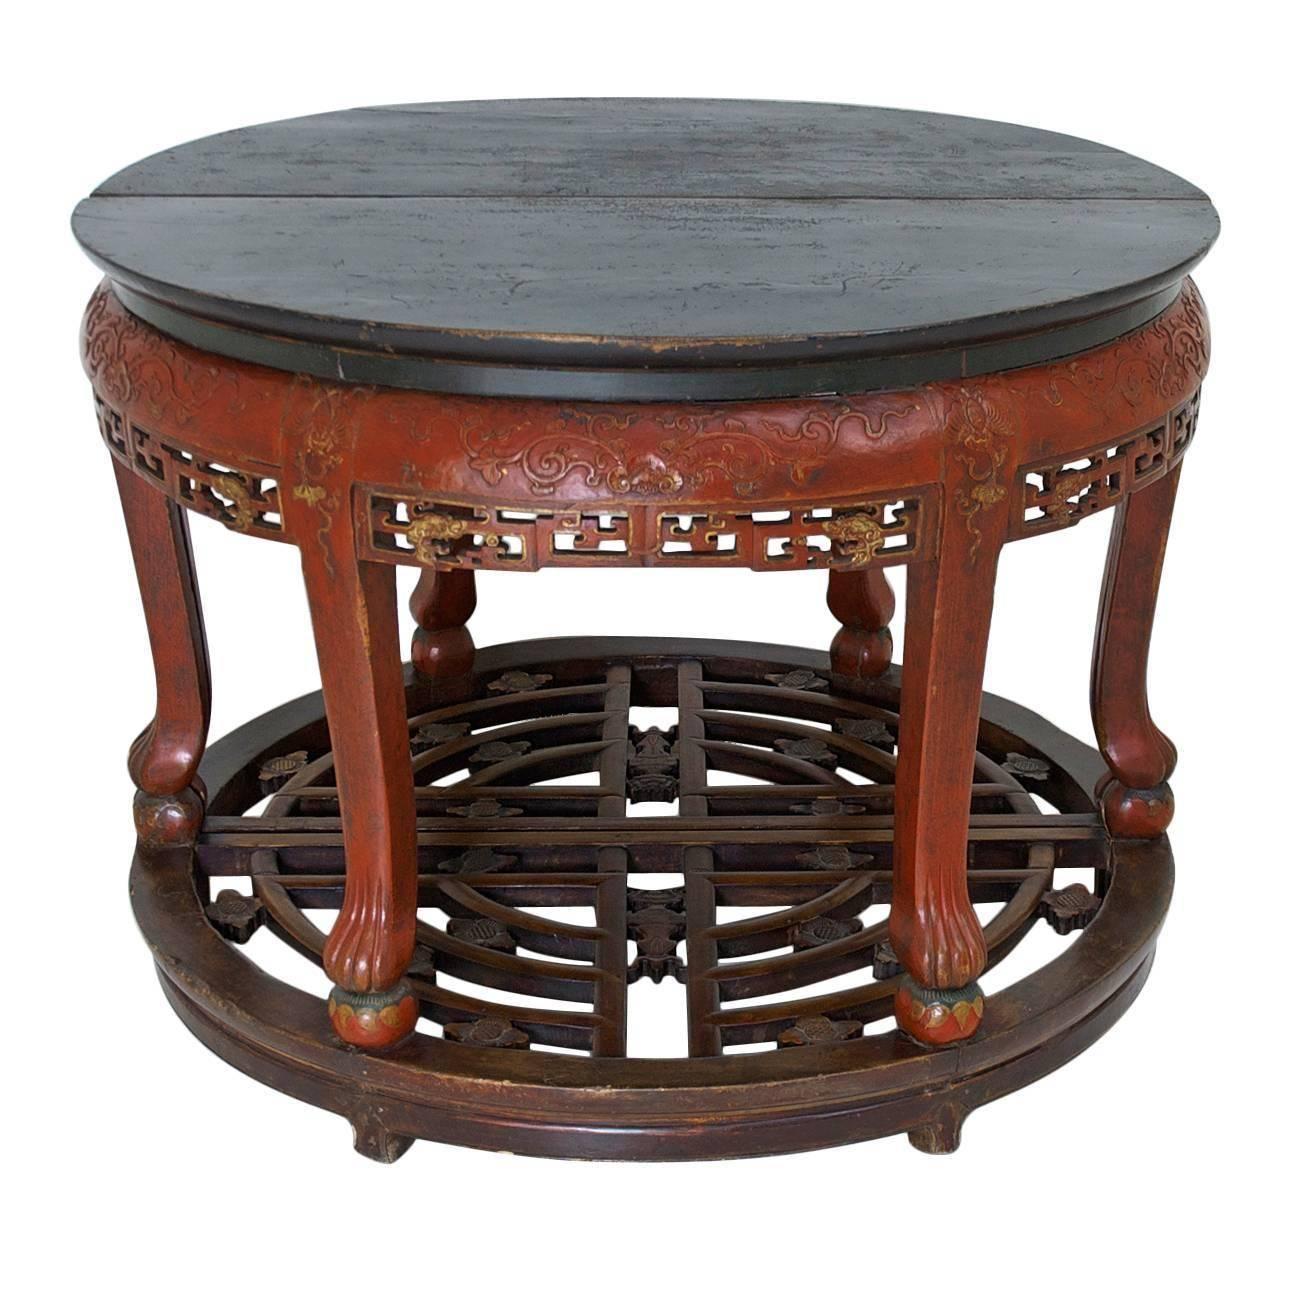 From Shanxi province of China, a handsomely carved pair of half-moon tables that can be used separately or together to form a round center table. Offers a black-lacquered top with carved convex apron on cabriole legs with carved lion's paw feet